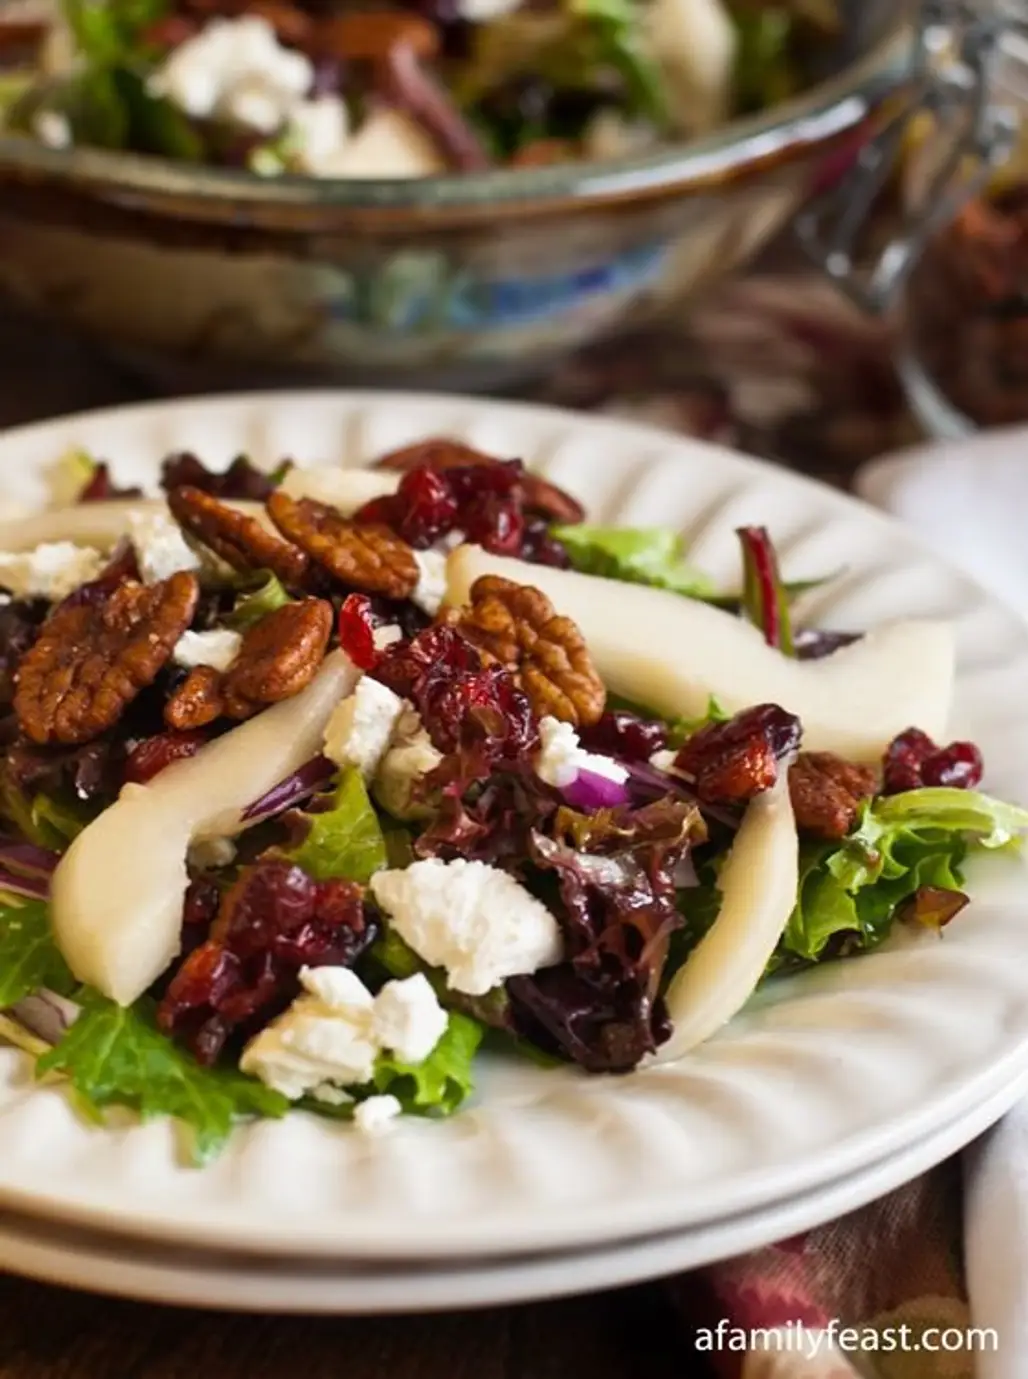 Mixed Greens with Pears, Goat Cheese, Dried Cranberries and Spiced Pecans